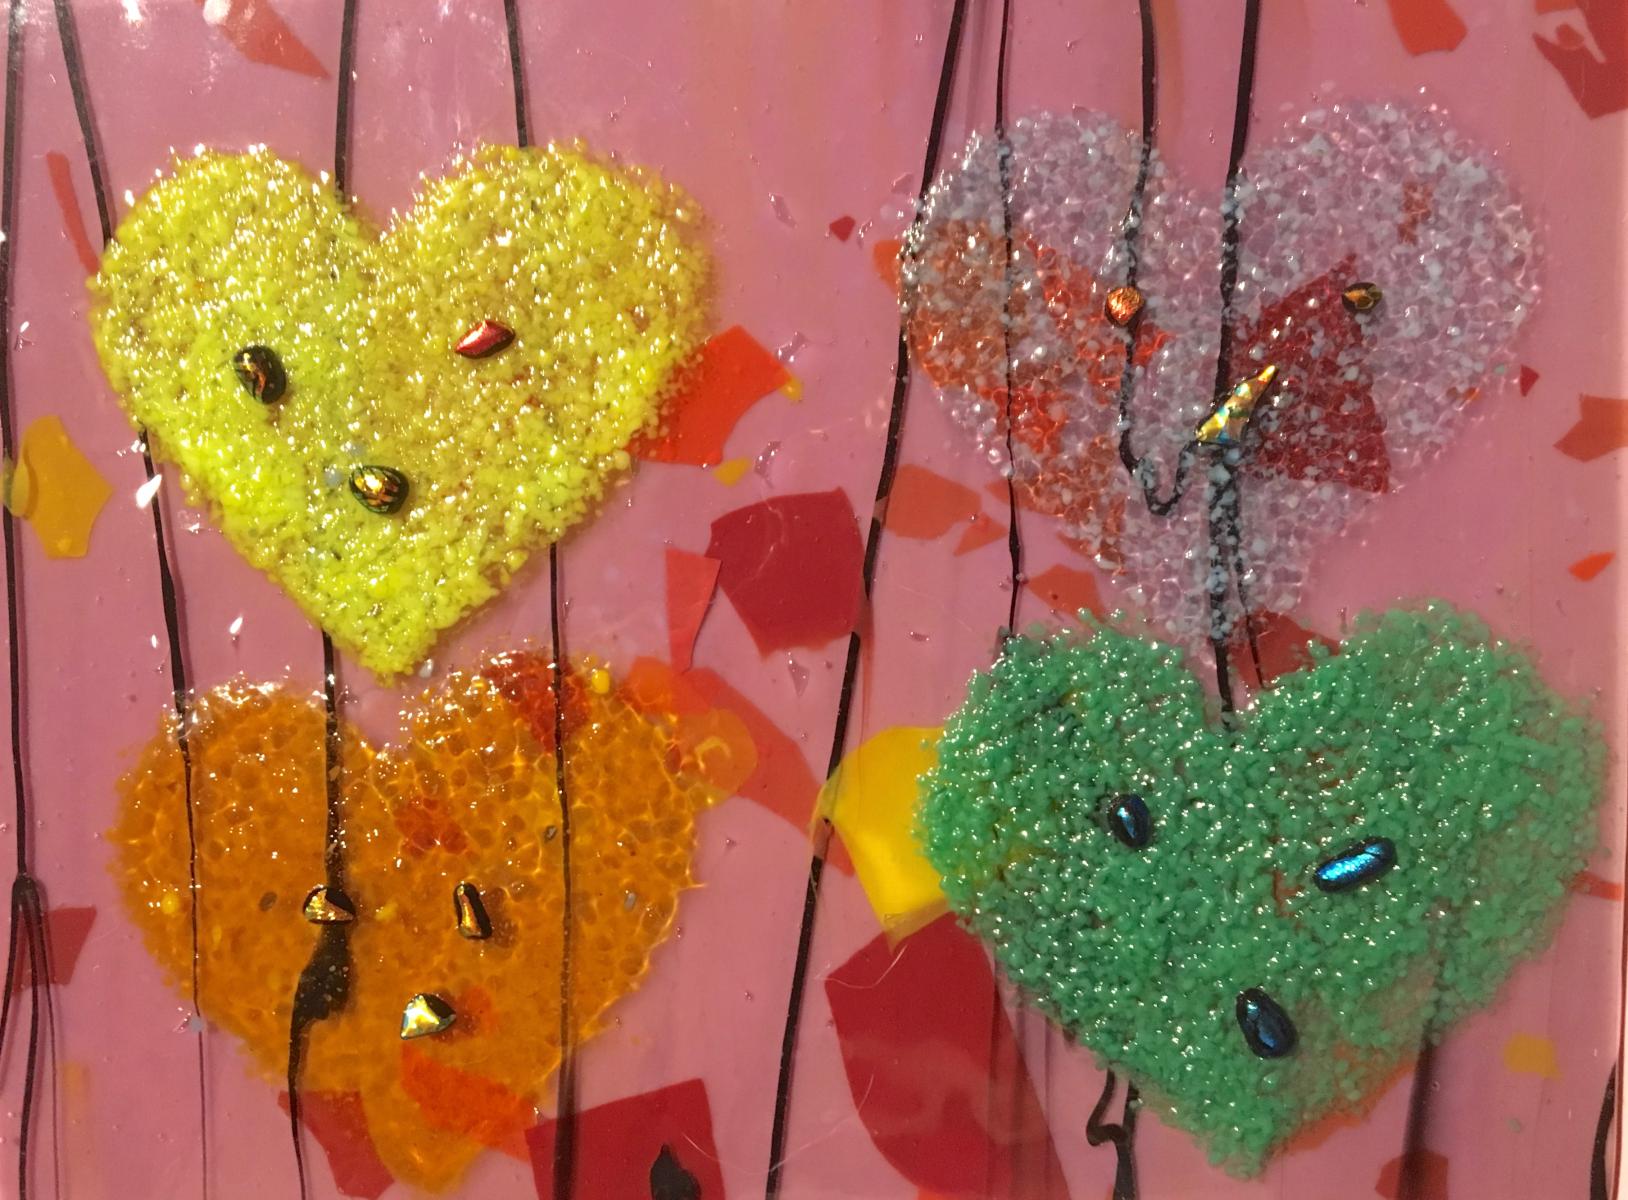 A panel of Hearts made in Glass